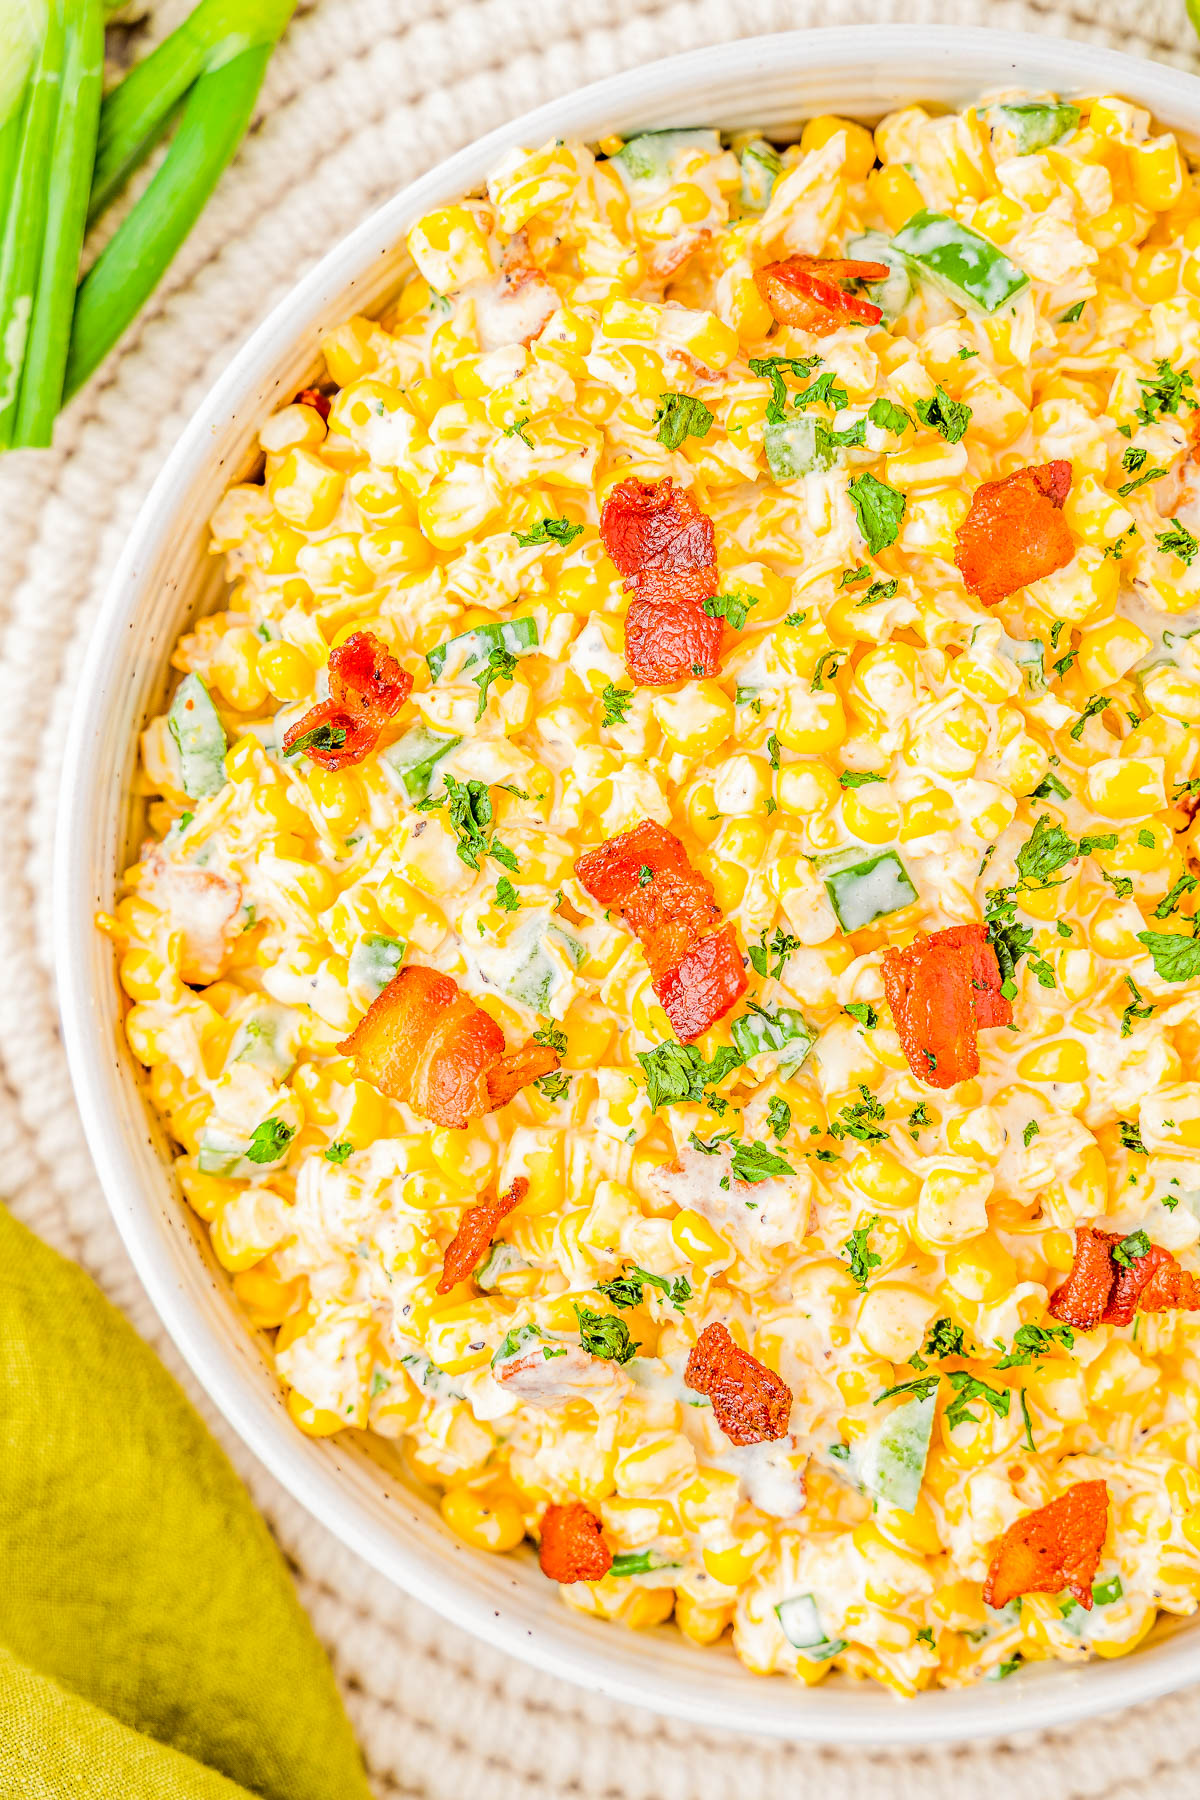 Creamy Corn and Bacon Salad - This EASY creamy corn salad with crispy bacon, jalapeño peppers and green onions for extra flavor, and plenty of shredded cheese will be a few FAVORITE side dish! Perfect for your next picnic, potluck, barbecue, or summer holiday like the 4th of July or Labor Day and it's ready in 15 minutes!